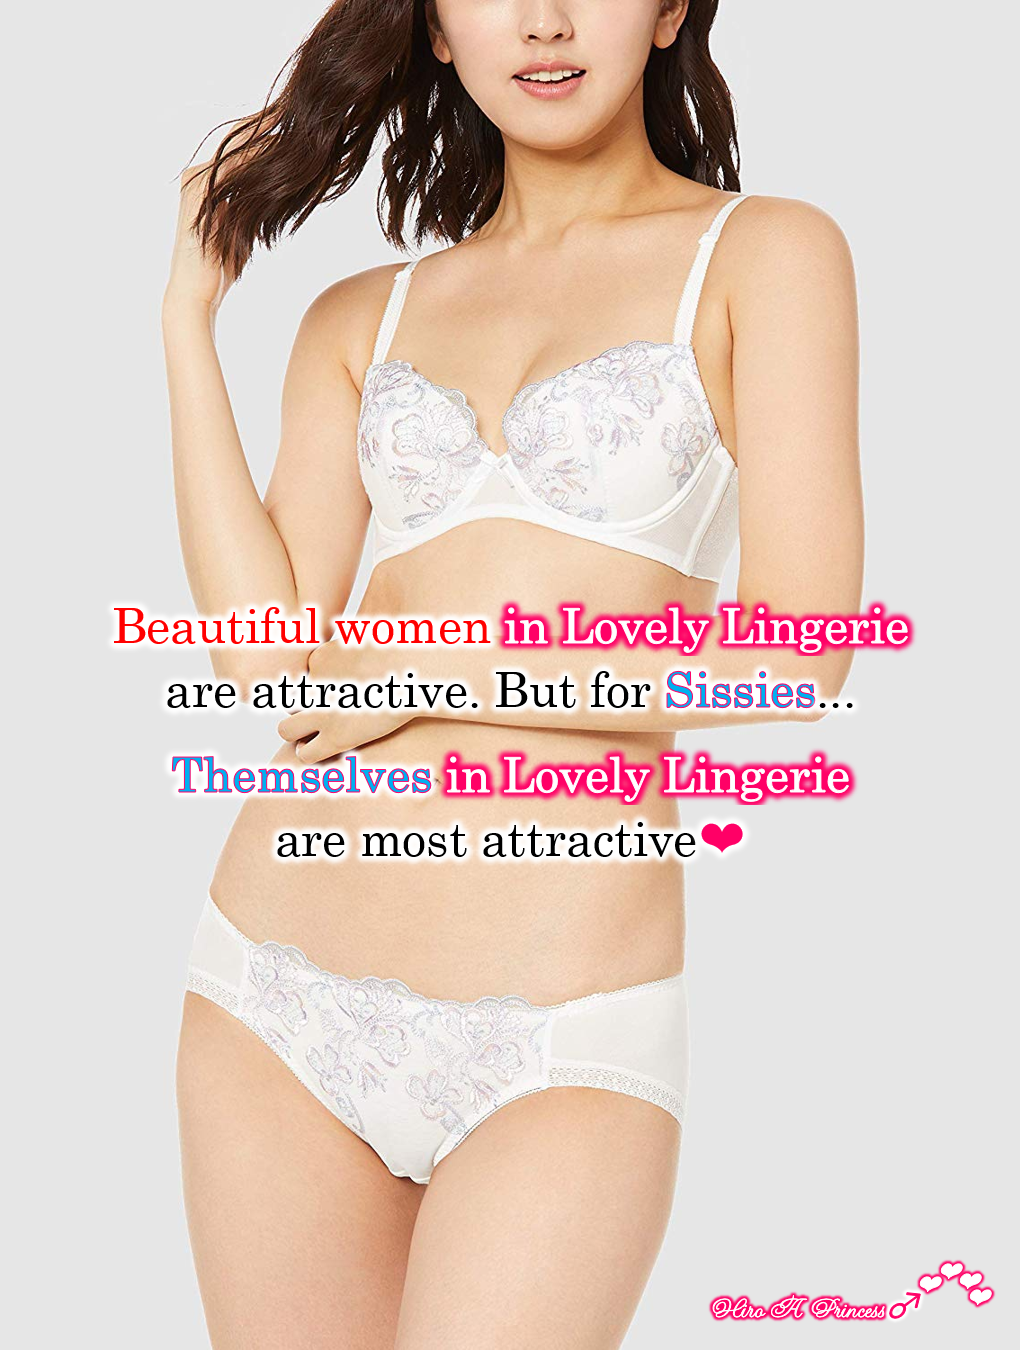 For sissies, themselves in Lovely Lingerie are most attractive E